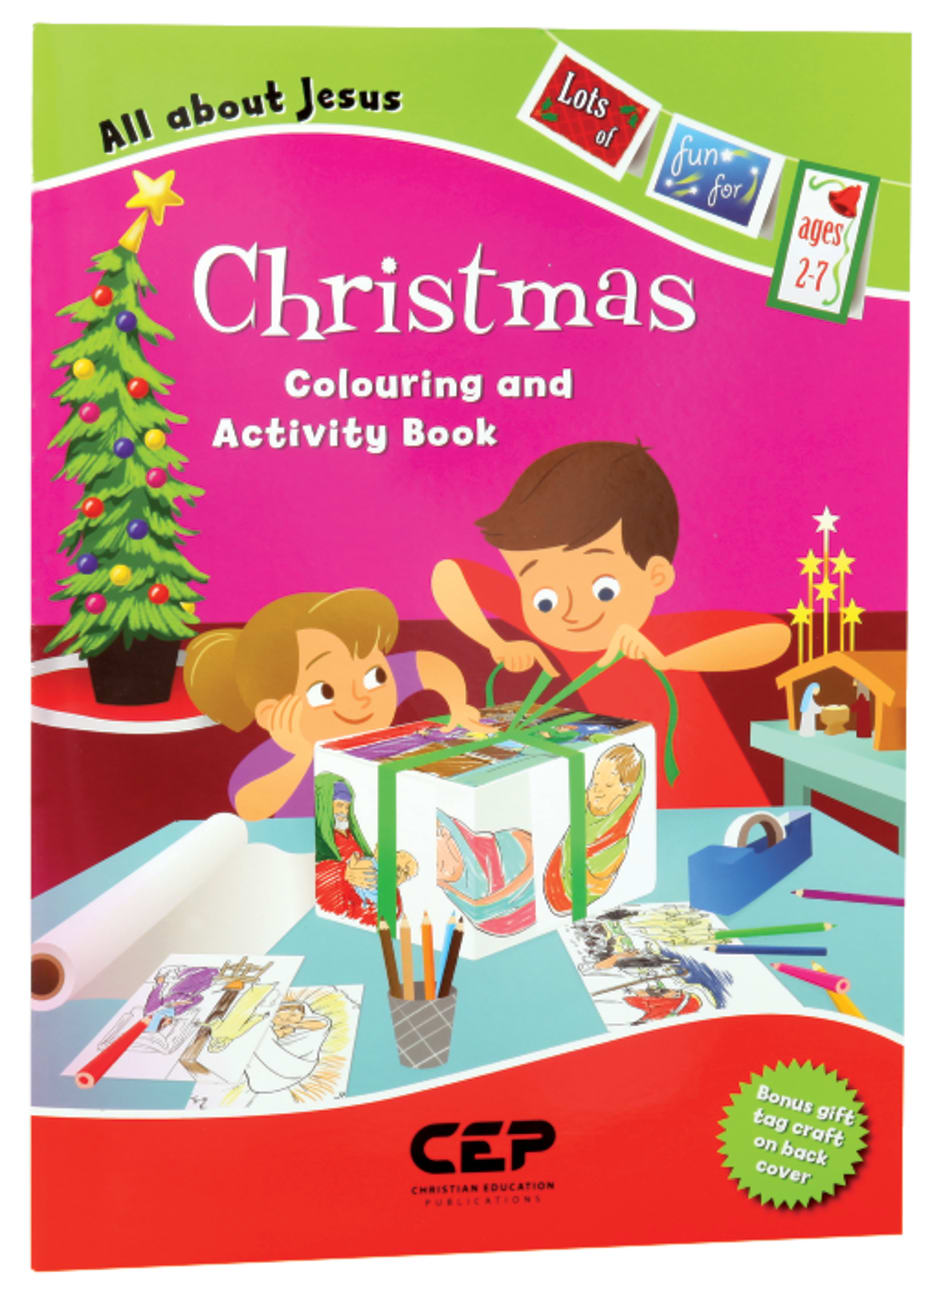 CHRISTMAS COLOURING AND ACTIVITY BOOK